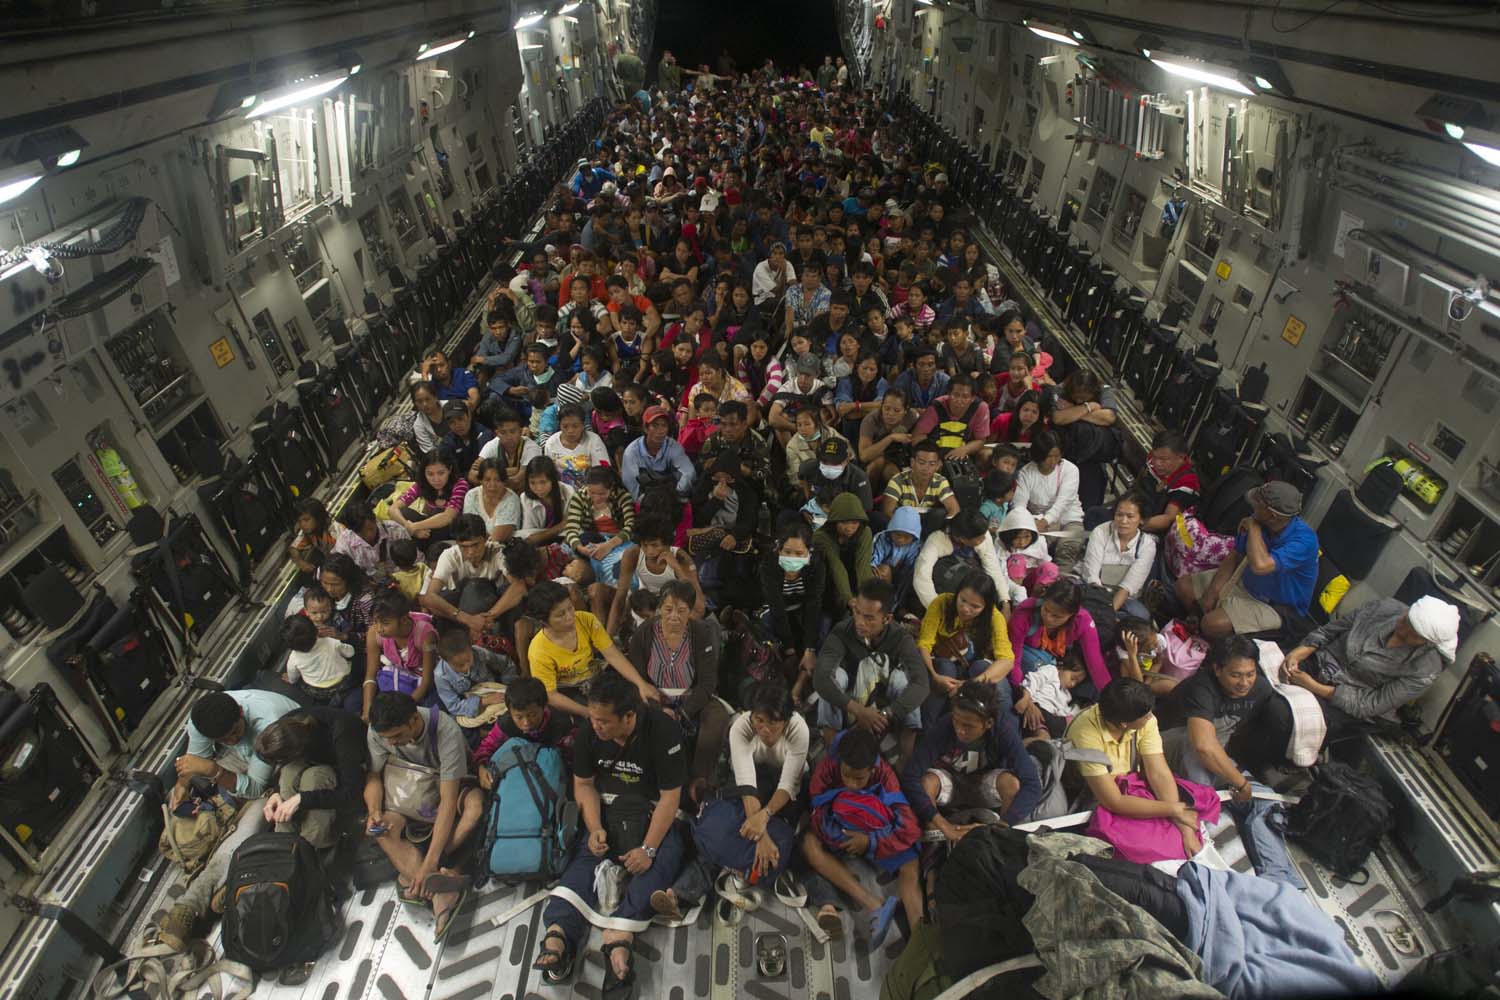 Nov. 22, 2013. In this image released by the U.S. Navy, Tacloban residents displaced by Typhoon Haiyan fill the cargo hold of a C-17 Globemaster military cargo plane.